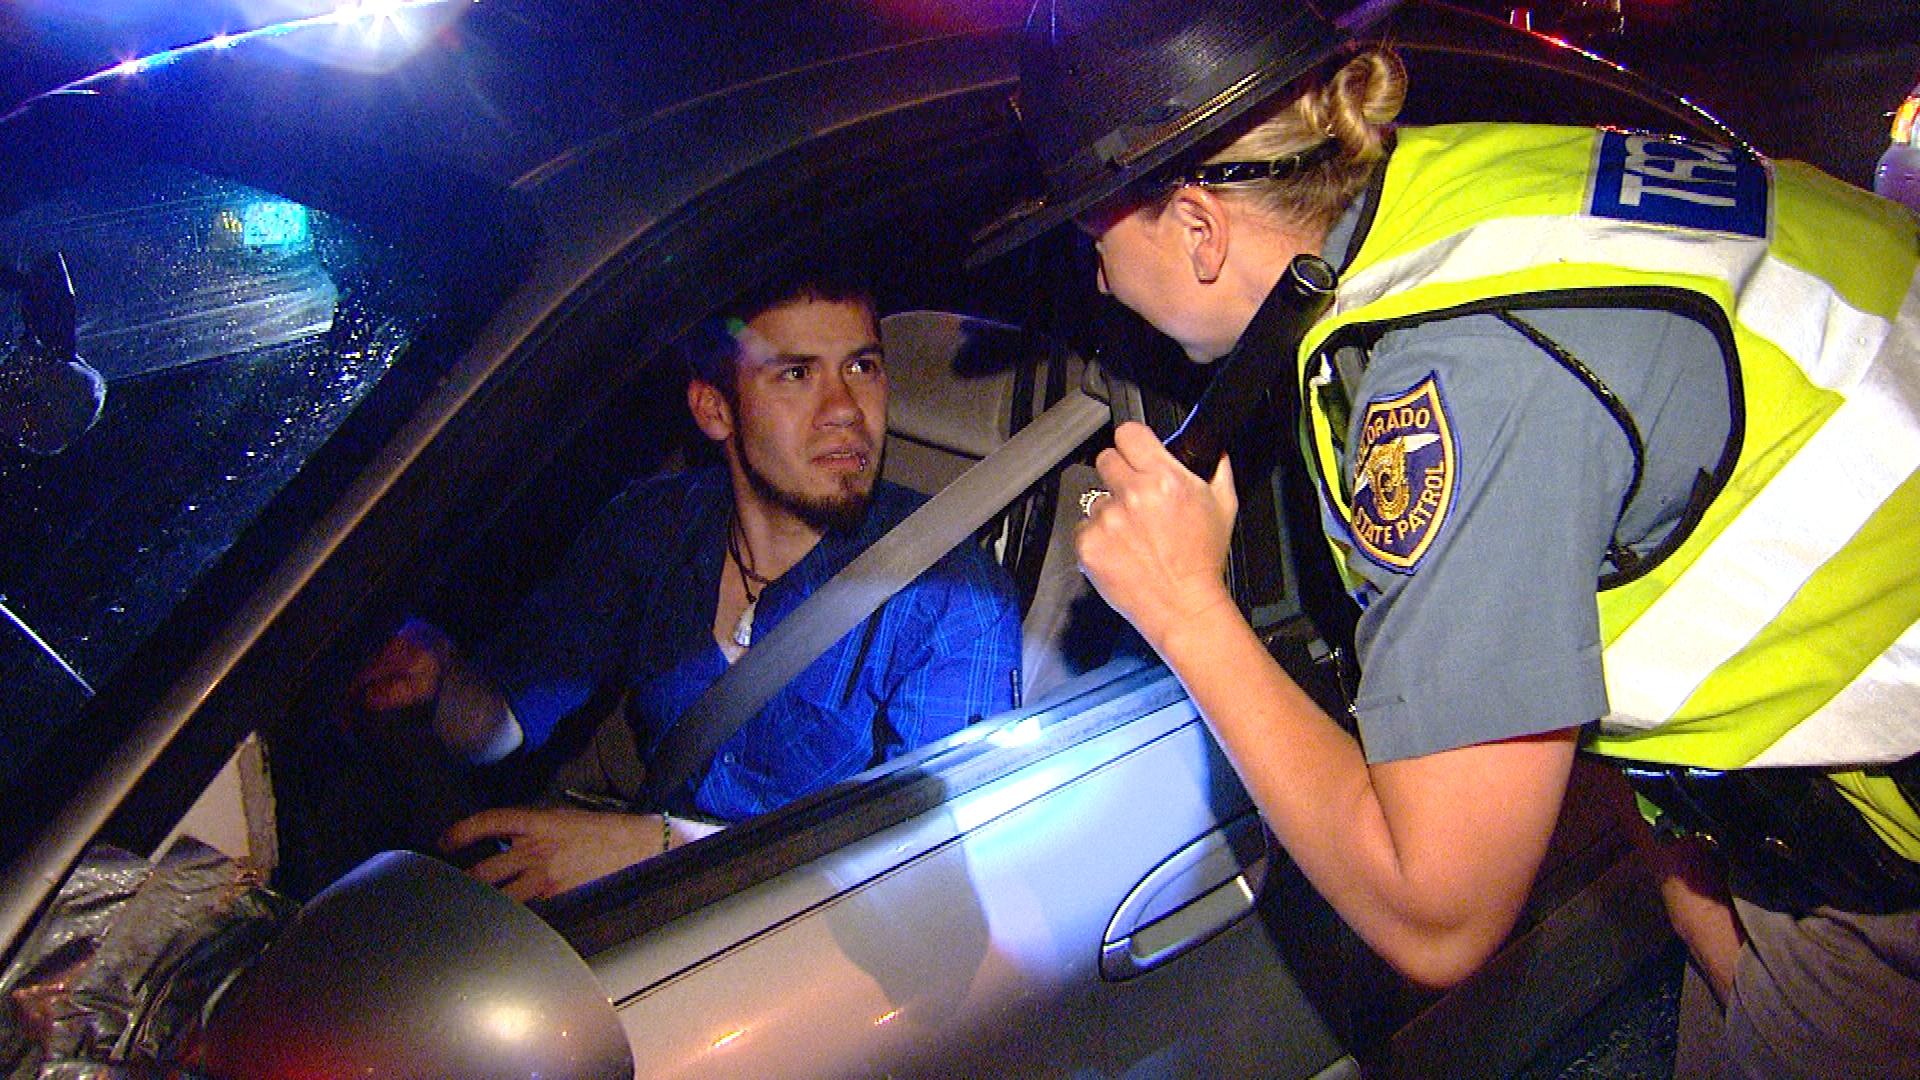 An image from a police checkpoint in 2013 (credit: CBS)